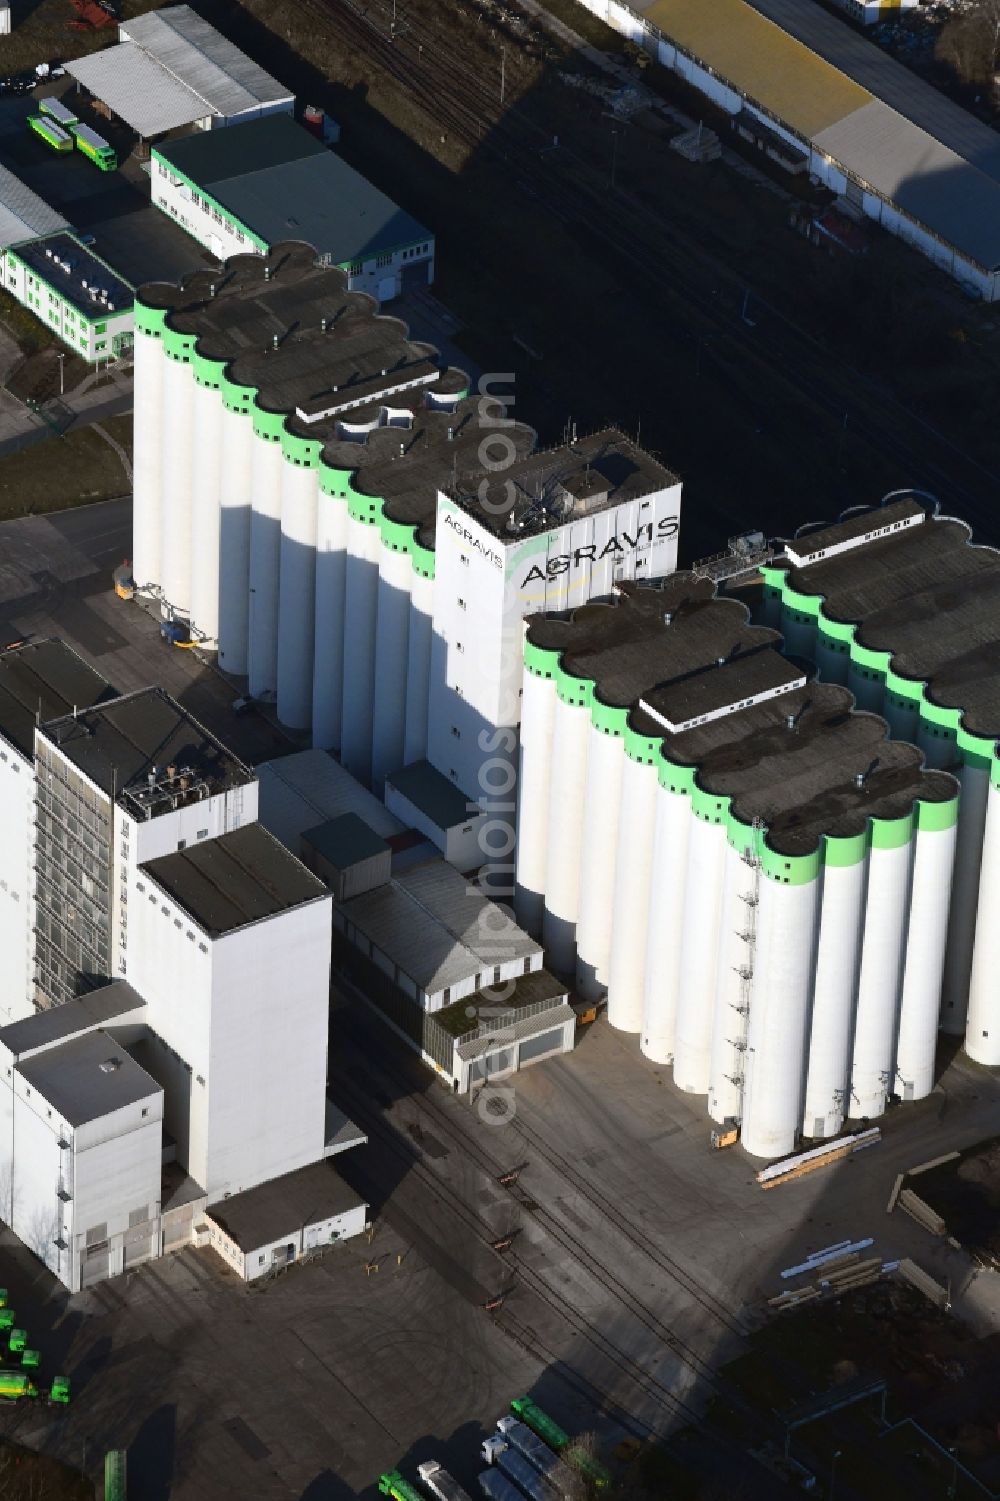 Aerial image Querfurt - High silo and grain storage with adjacent storage on Obhaeuser Weg in Querfurt in the state Saxony-Anhalt, Germany